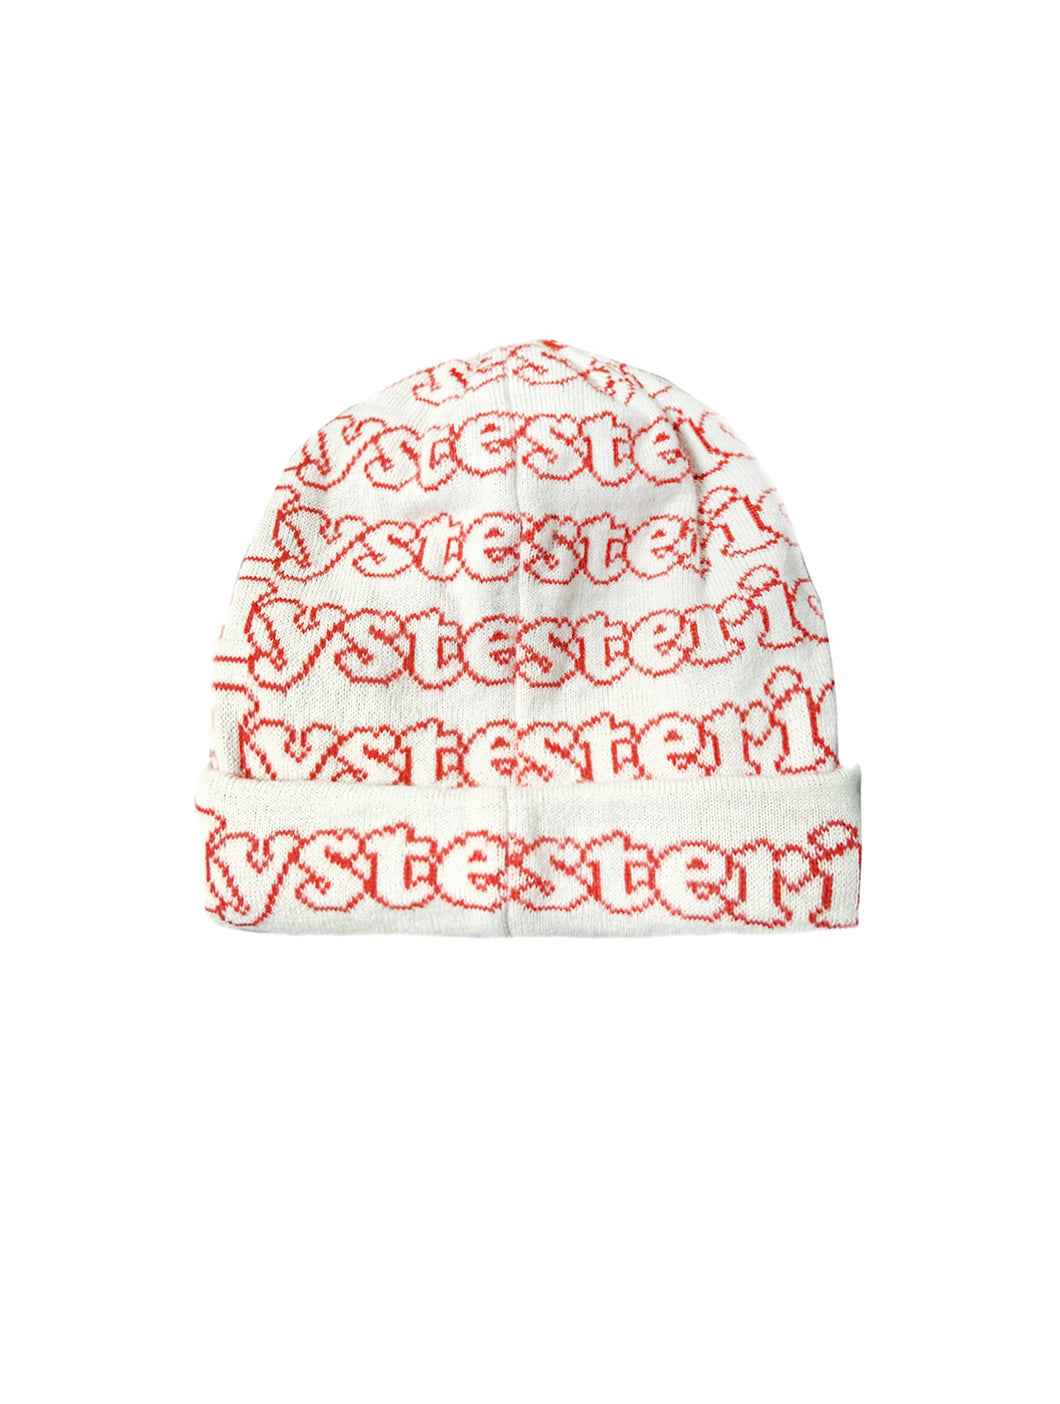 Hysteric Glamour Red Typographic Knit Hat